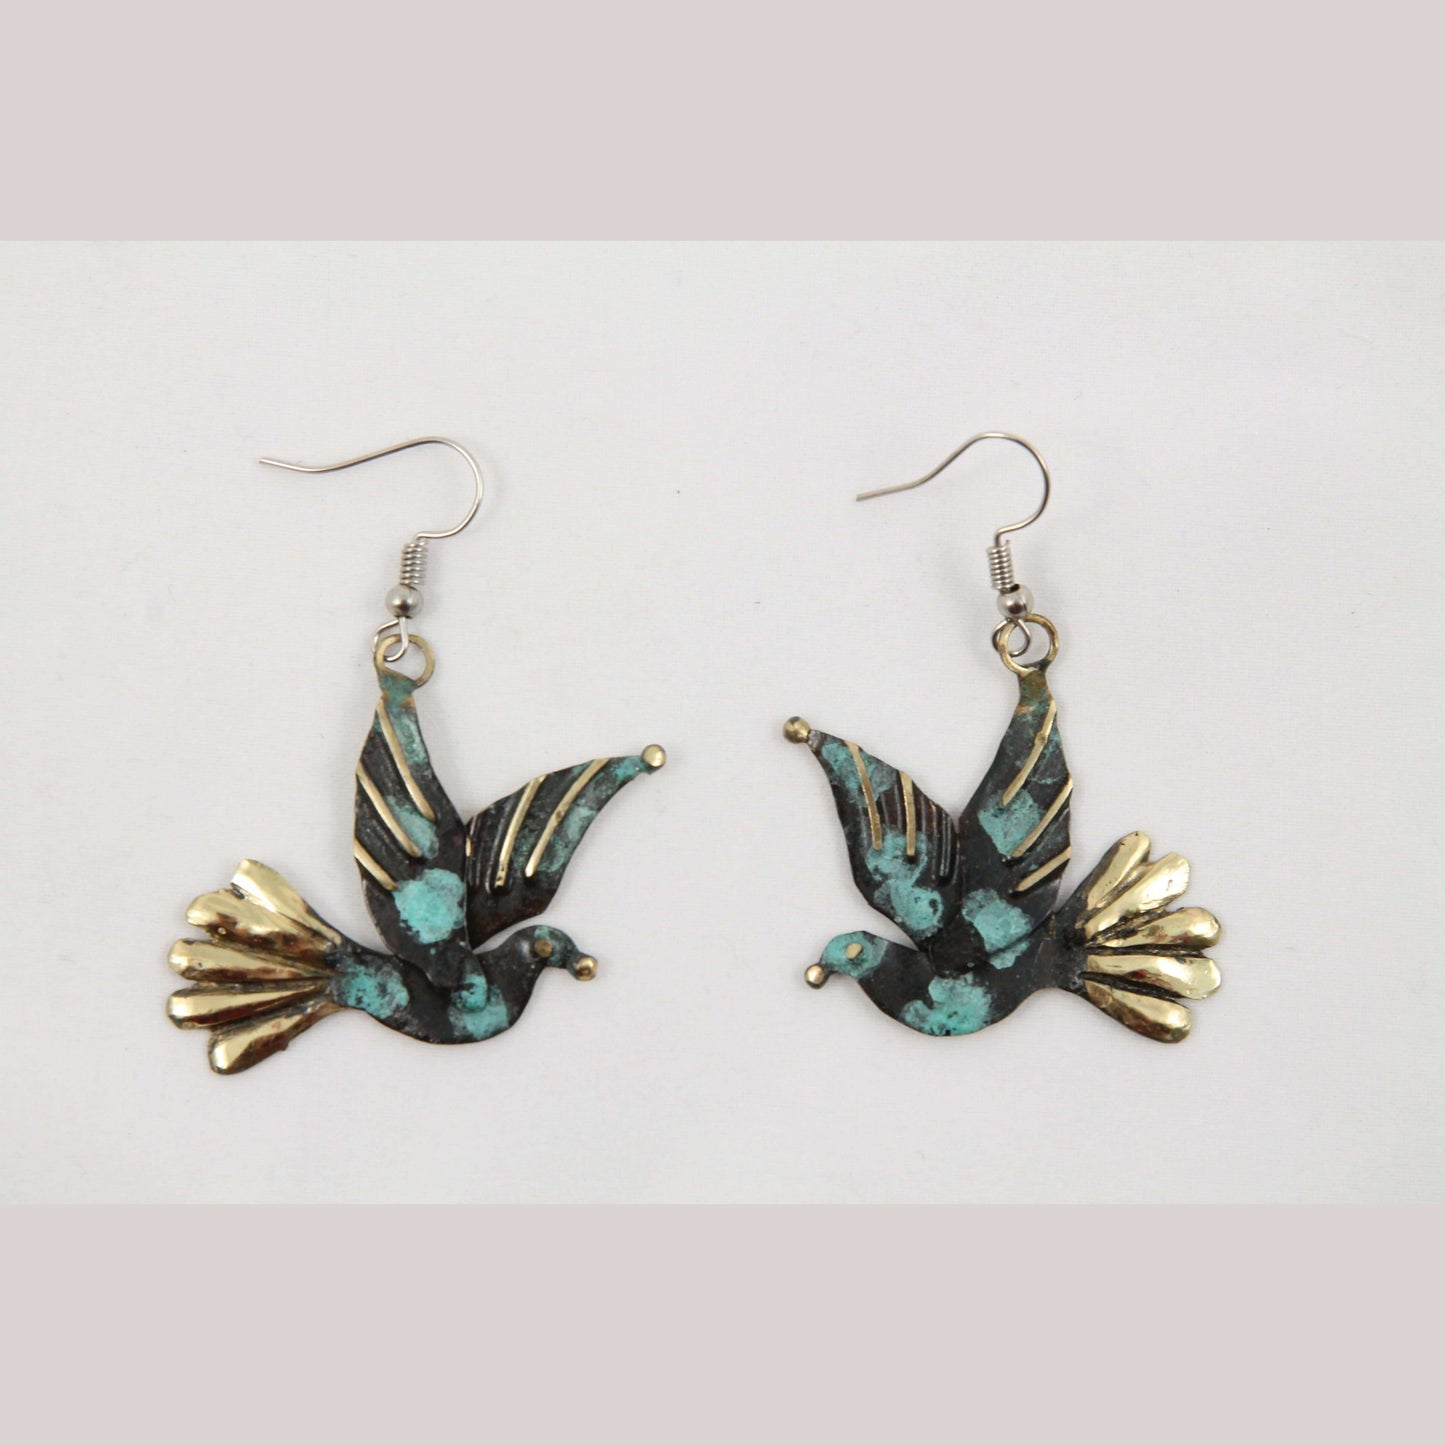 Authentic Hand Crafted Earrings Jewelry Mexican Folk Wearable Art Bronze Doves